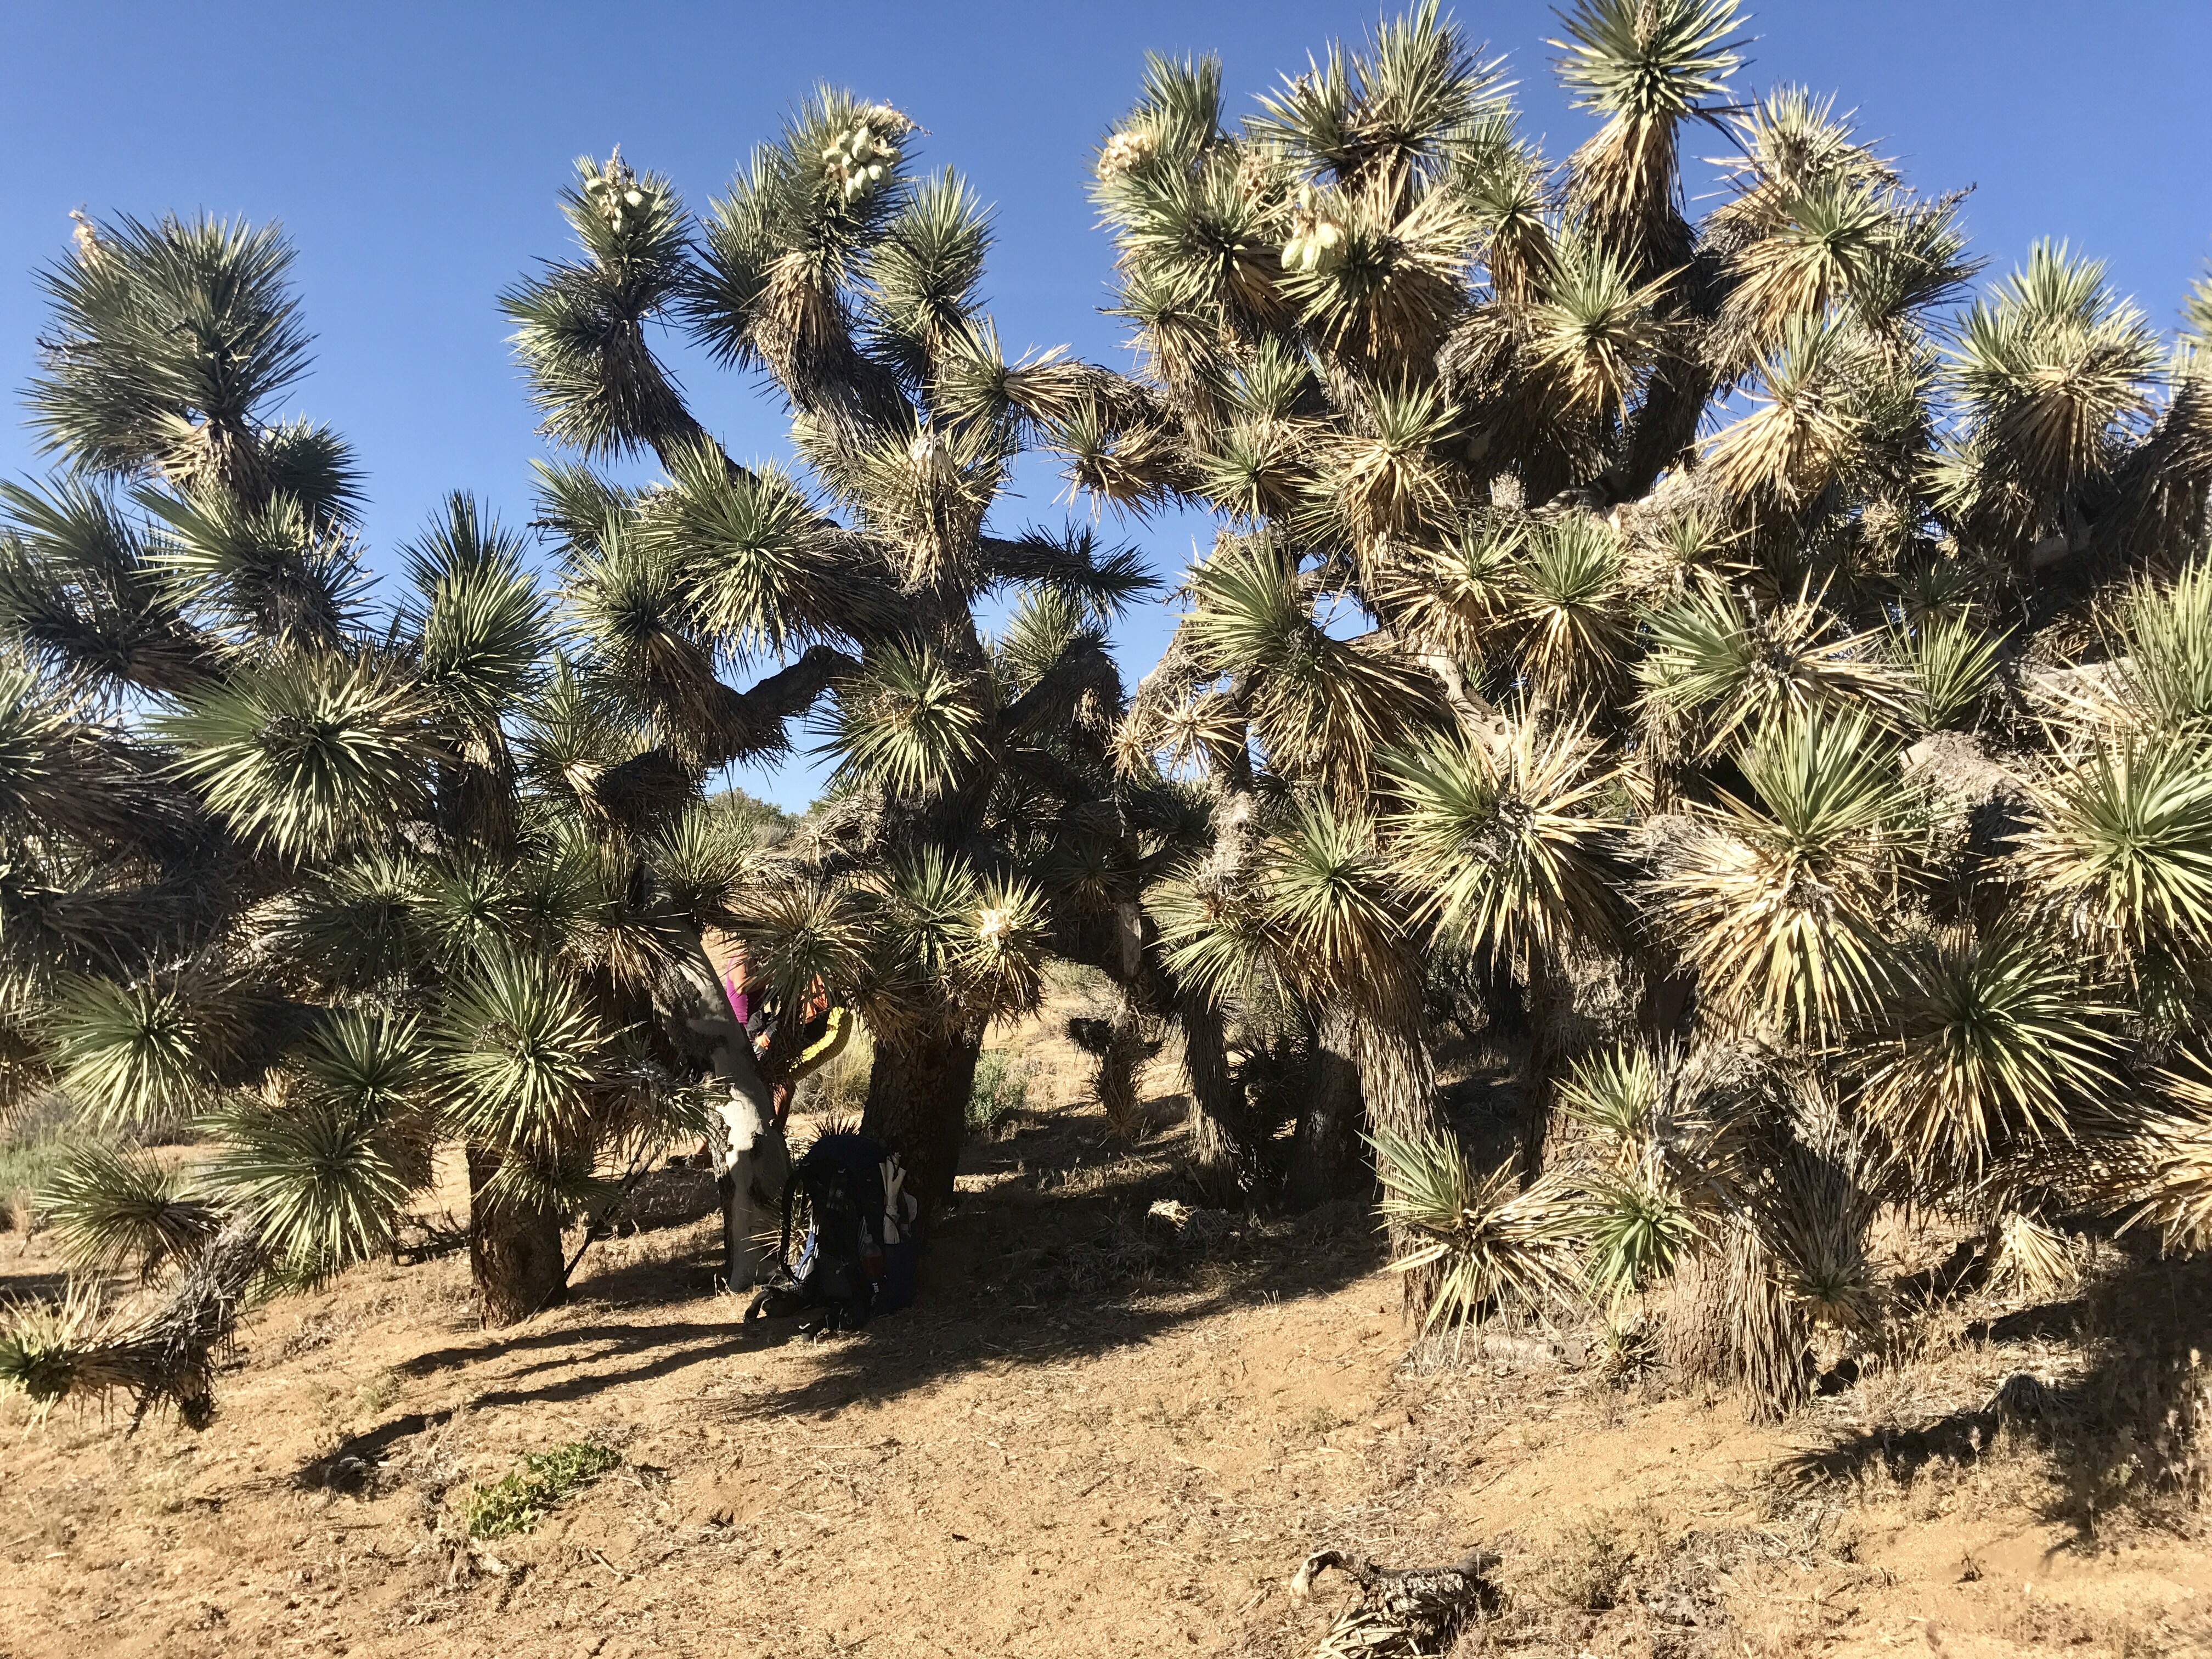 PCT Day 54 – Napping Under Joshua Trees in the Mojave Desert